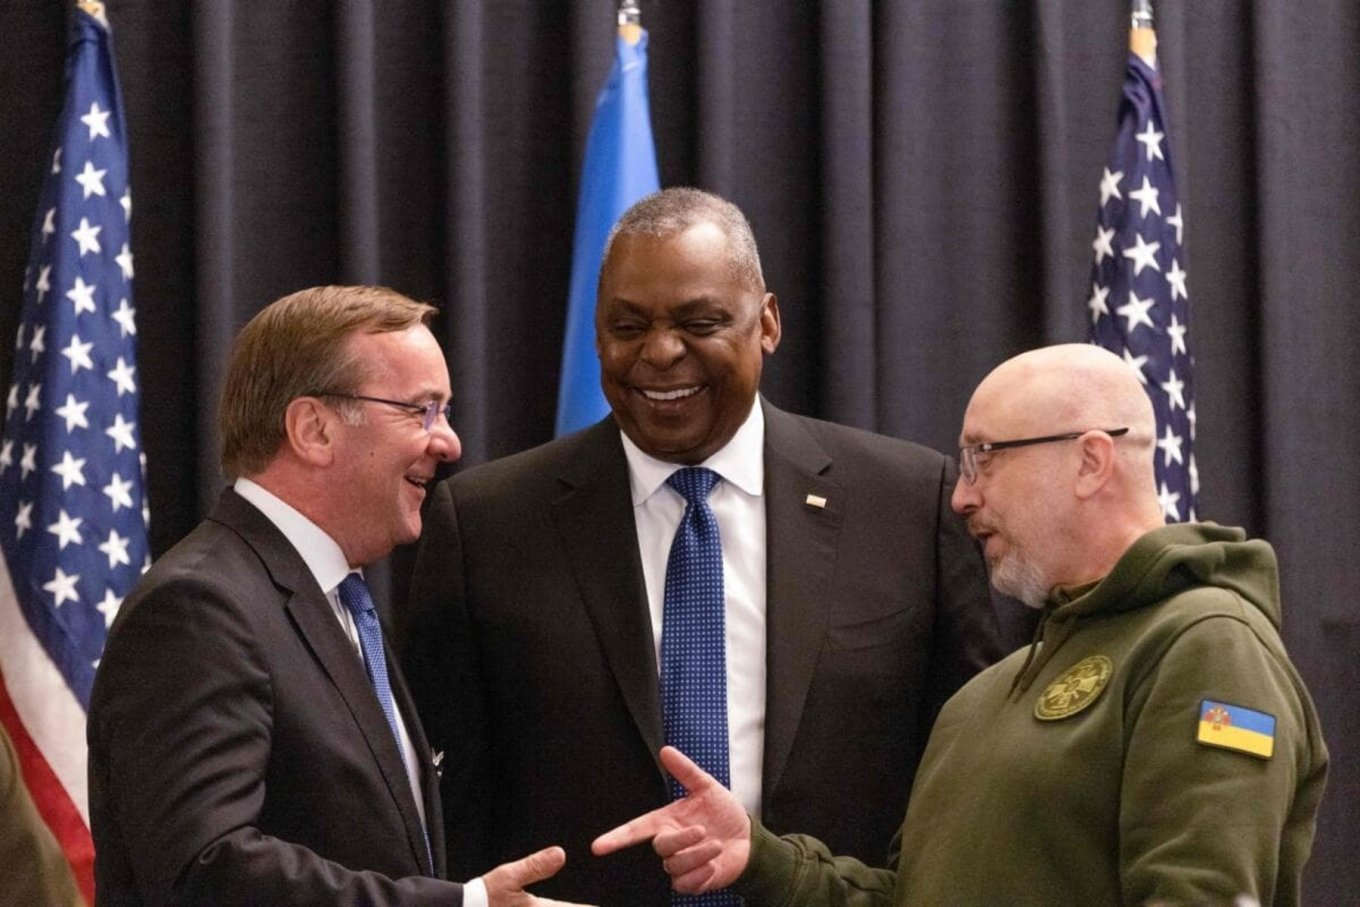 Ministers of defense of Germany, U.S. and Ukraine, left to right: Boris Pistorius, Lloyd Austin, and Oleksii Reznikov at Ramstein-format meeting on January 20, 2023